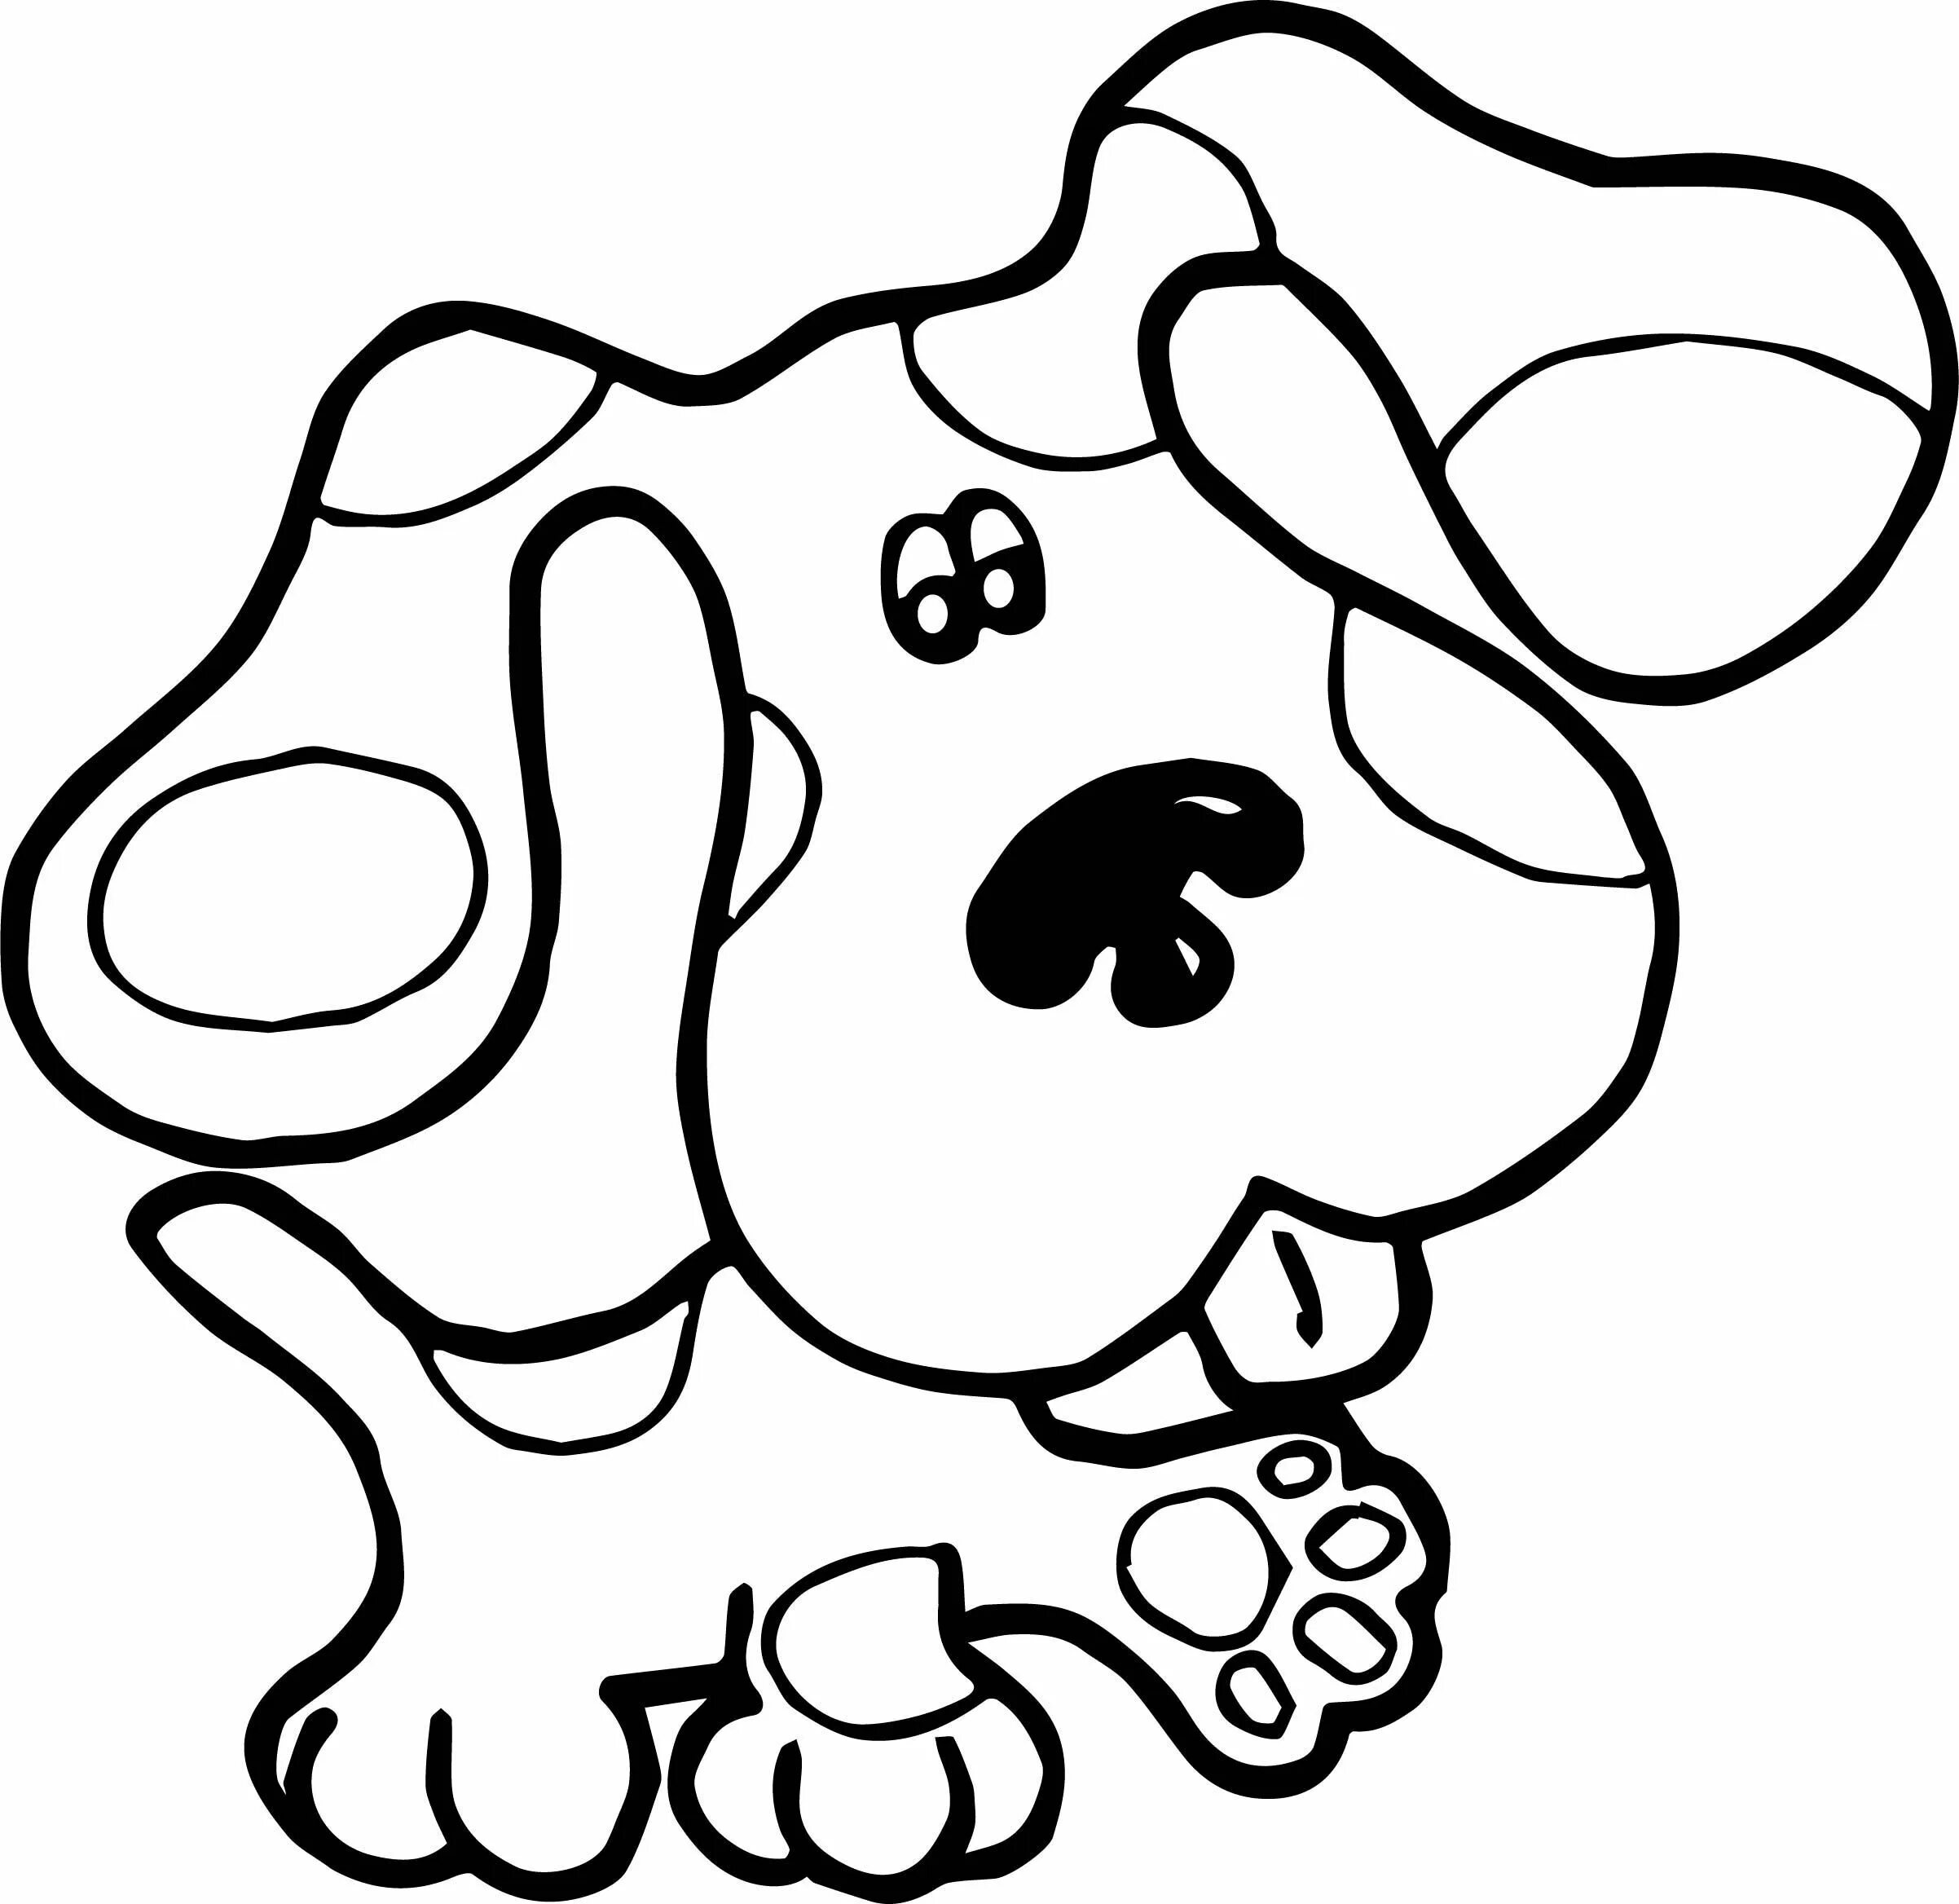 Content of blue puppy coloring page